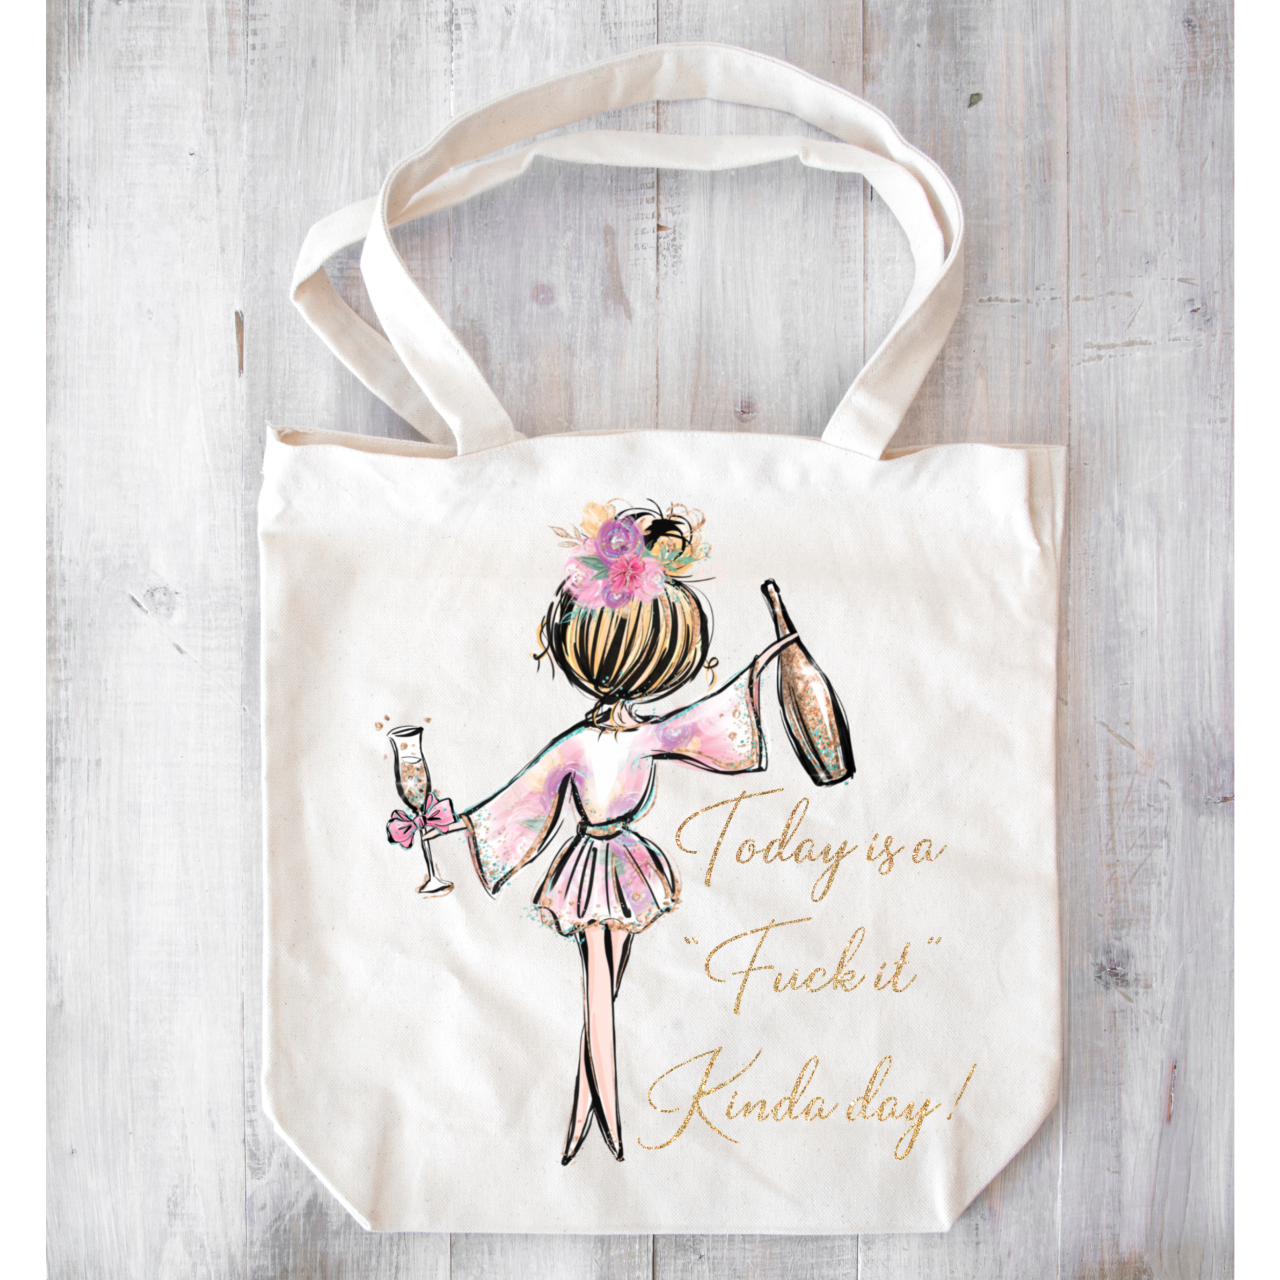 Today Has Been A F**k it Kinda Day Tote Bag